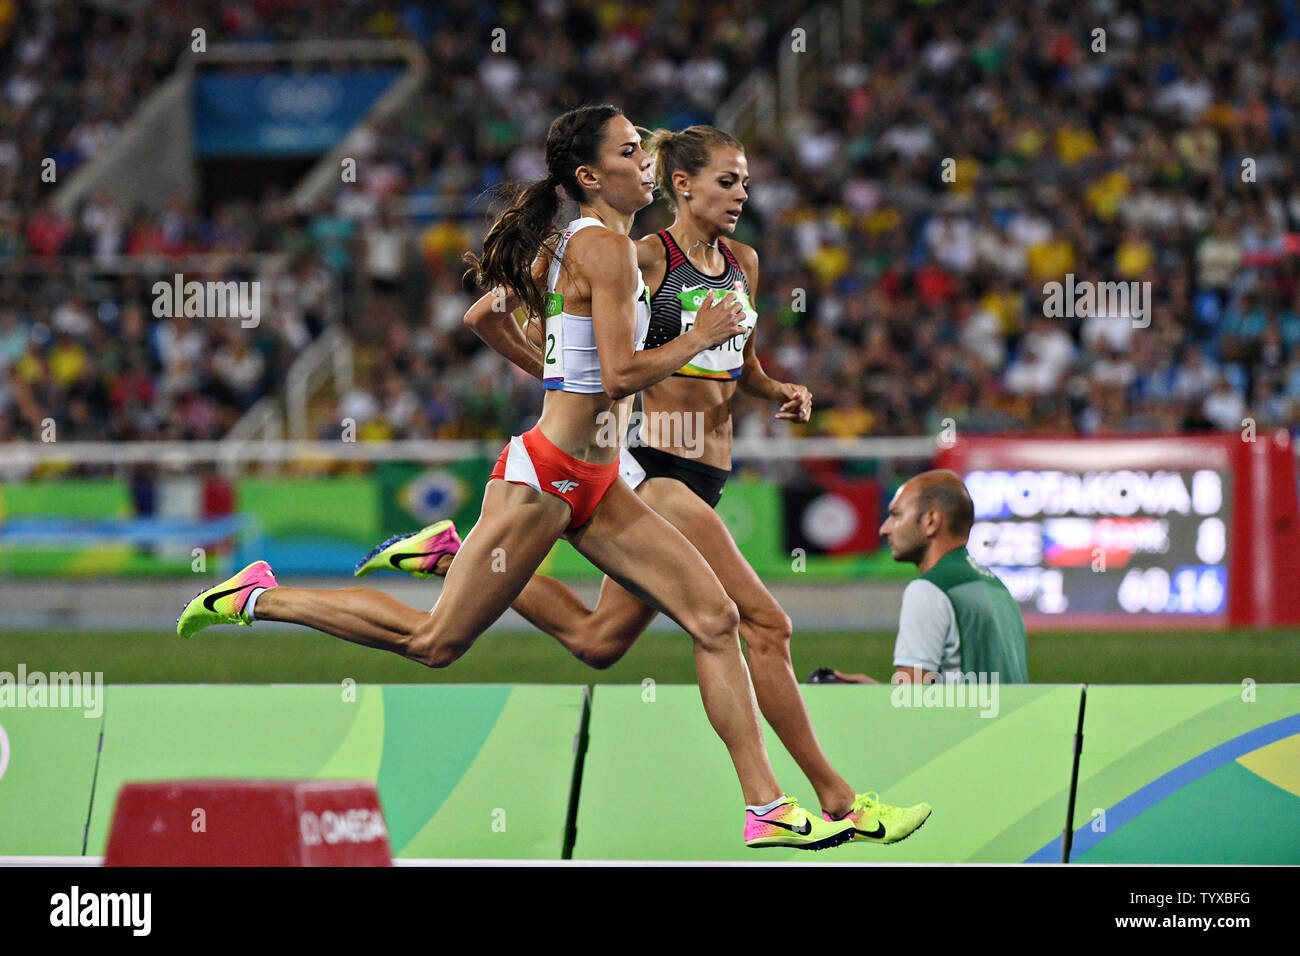 Joanna Jozwik of Poland passes Canada Melissa Bishop competing in the Women's 800m Semifinal 2 at the 2016 Rio Summer Olympics in Rio de Janeiro, Brazil, on August 18, 2016.   Photo by Richard Ellis/UPI Stock Photo